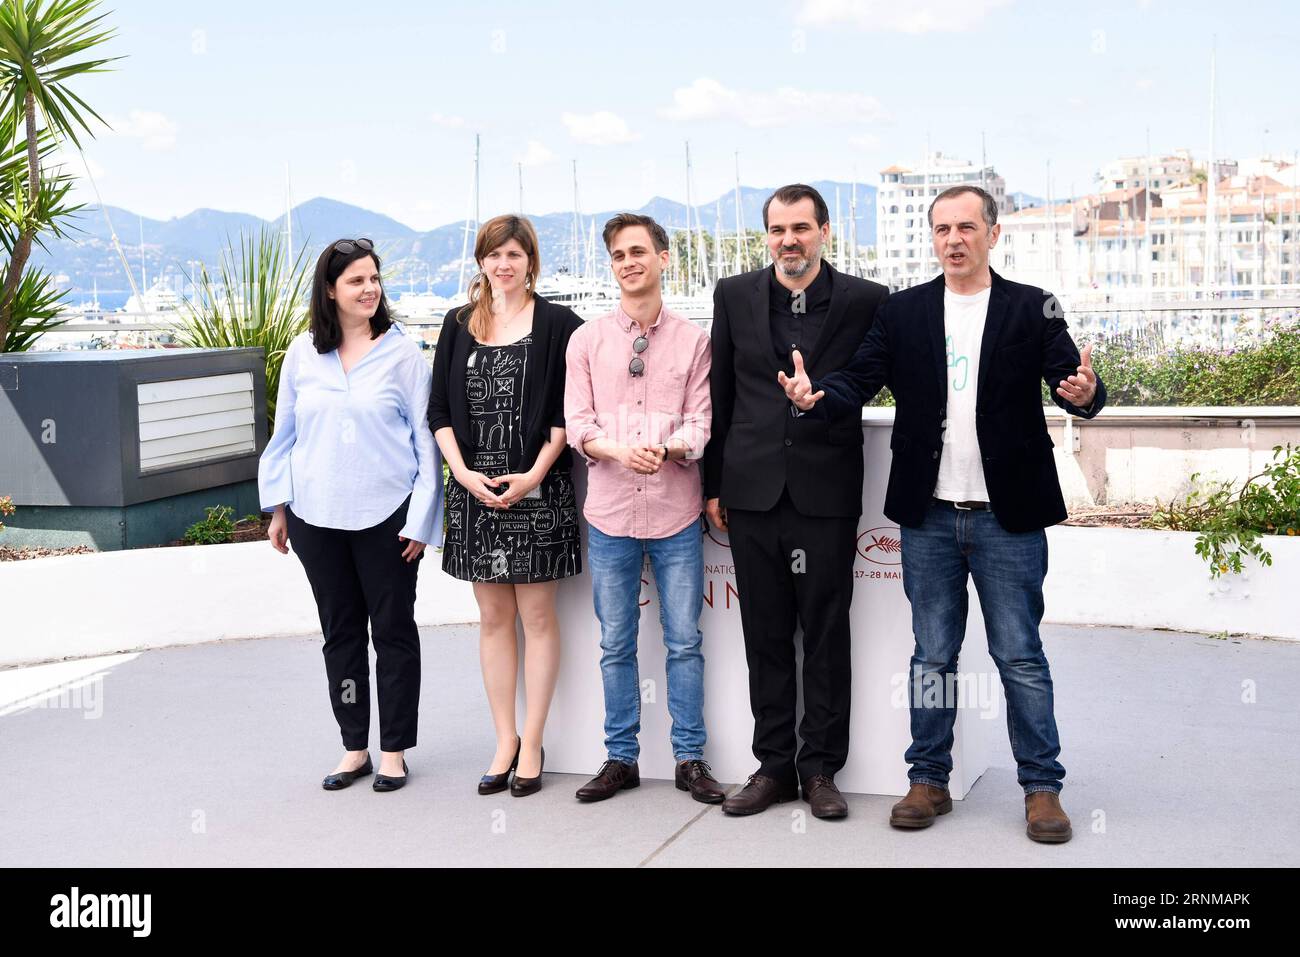 (170519) -- CANNES, May 19, 2017 -- Cast members of the film Jupiter s Moon pose for a photocall in Cannes, France, on May 19, 2017. The film Jupiter s Moon directed by Hungarian director Kornel Mundruczo will compete for the Palme d Or on the 70th Cannes Film Festival. )(gl) FRANCE-CANNES-70TH CANNES FILM FESTIVAL-IN COMPETITION-JUPITER S MOON-PHOTOCALL ChenxYichen PUBLICATIONxNOTxINxCHN   Cannes May 19 2017 Cast Members of The Film Jupiter S Moon Pose for a photo call in Cannes France ON May 19 2017 The Film Jupiter S Moon Directed by Hungarian Director Kornel Mundruczo will compete for The Stock Photo